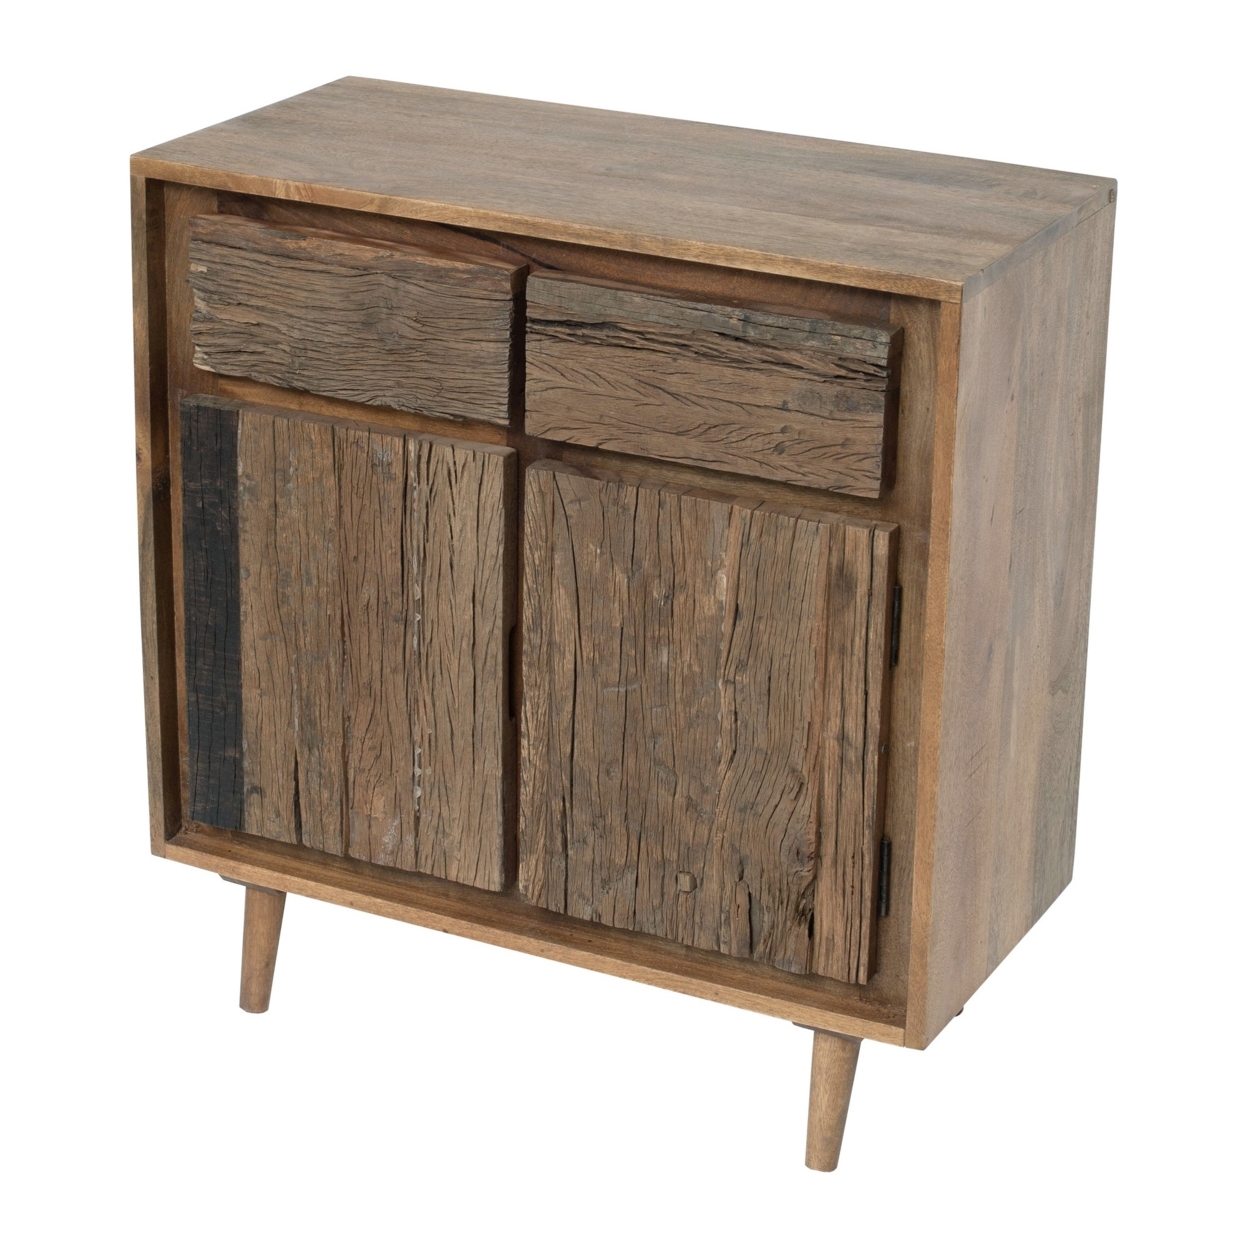 31 Inch Side Cabinet Console, 2 Doors And Drawers, Acacia, Mango Wood Brown- Saltoro Sherpi